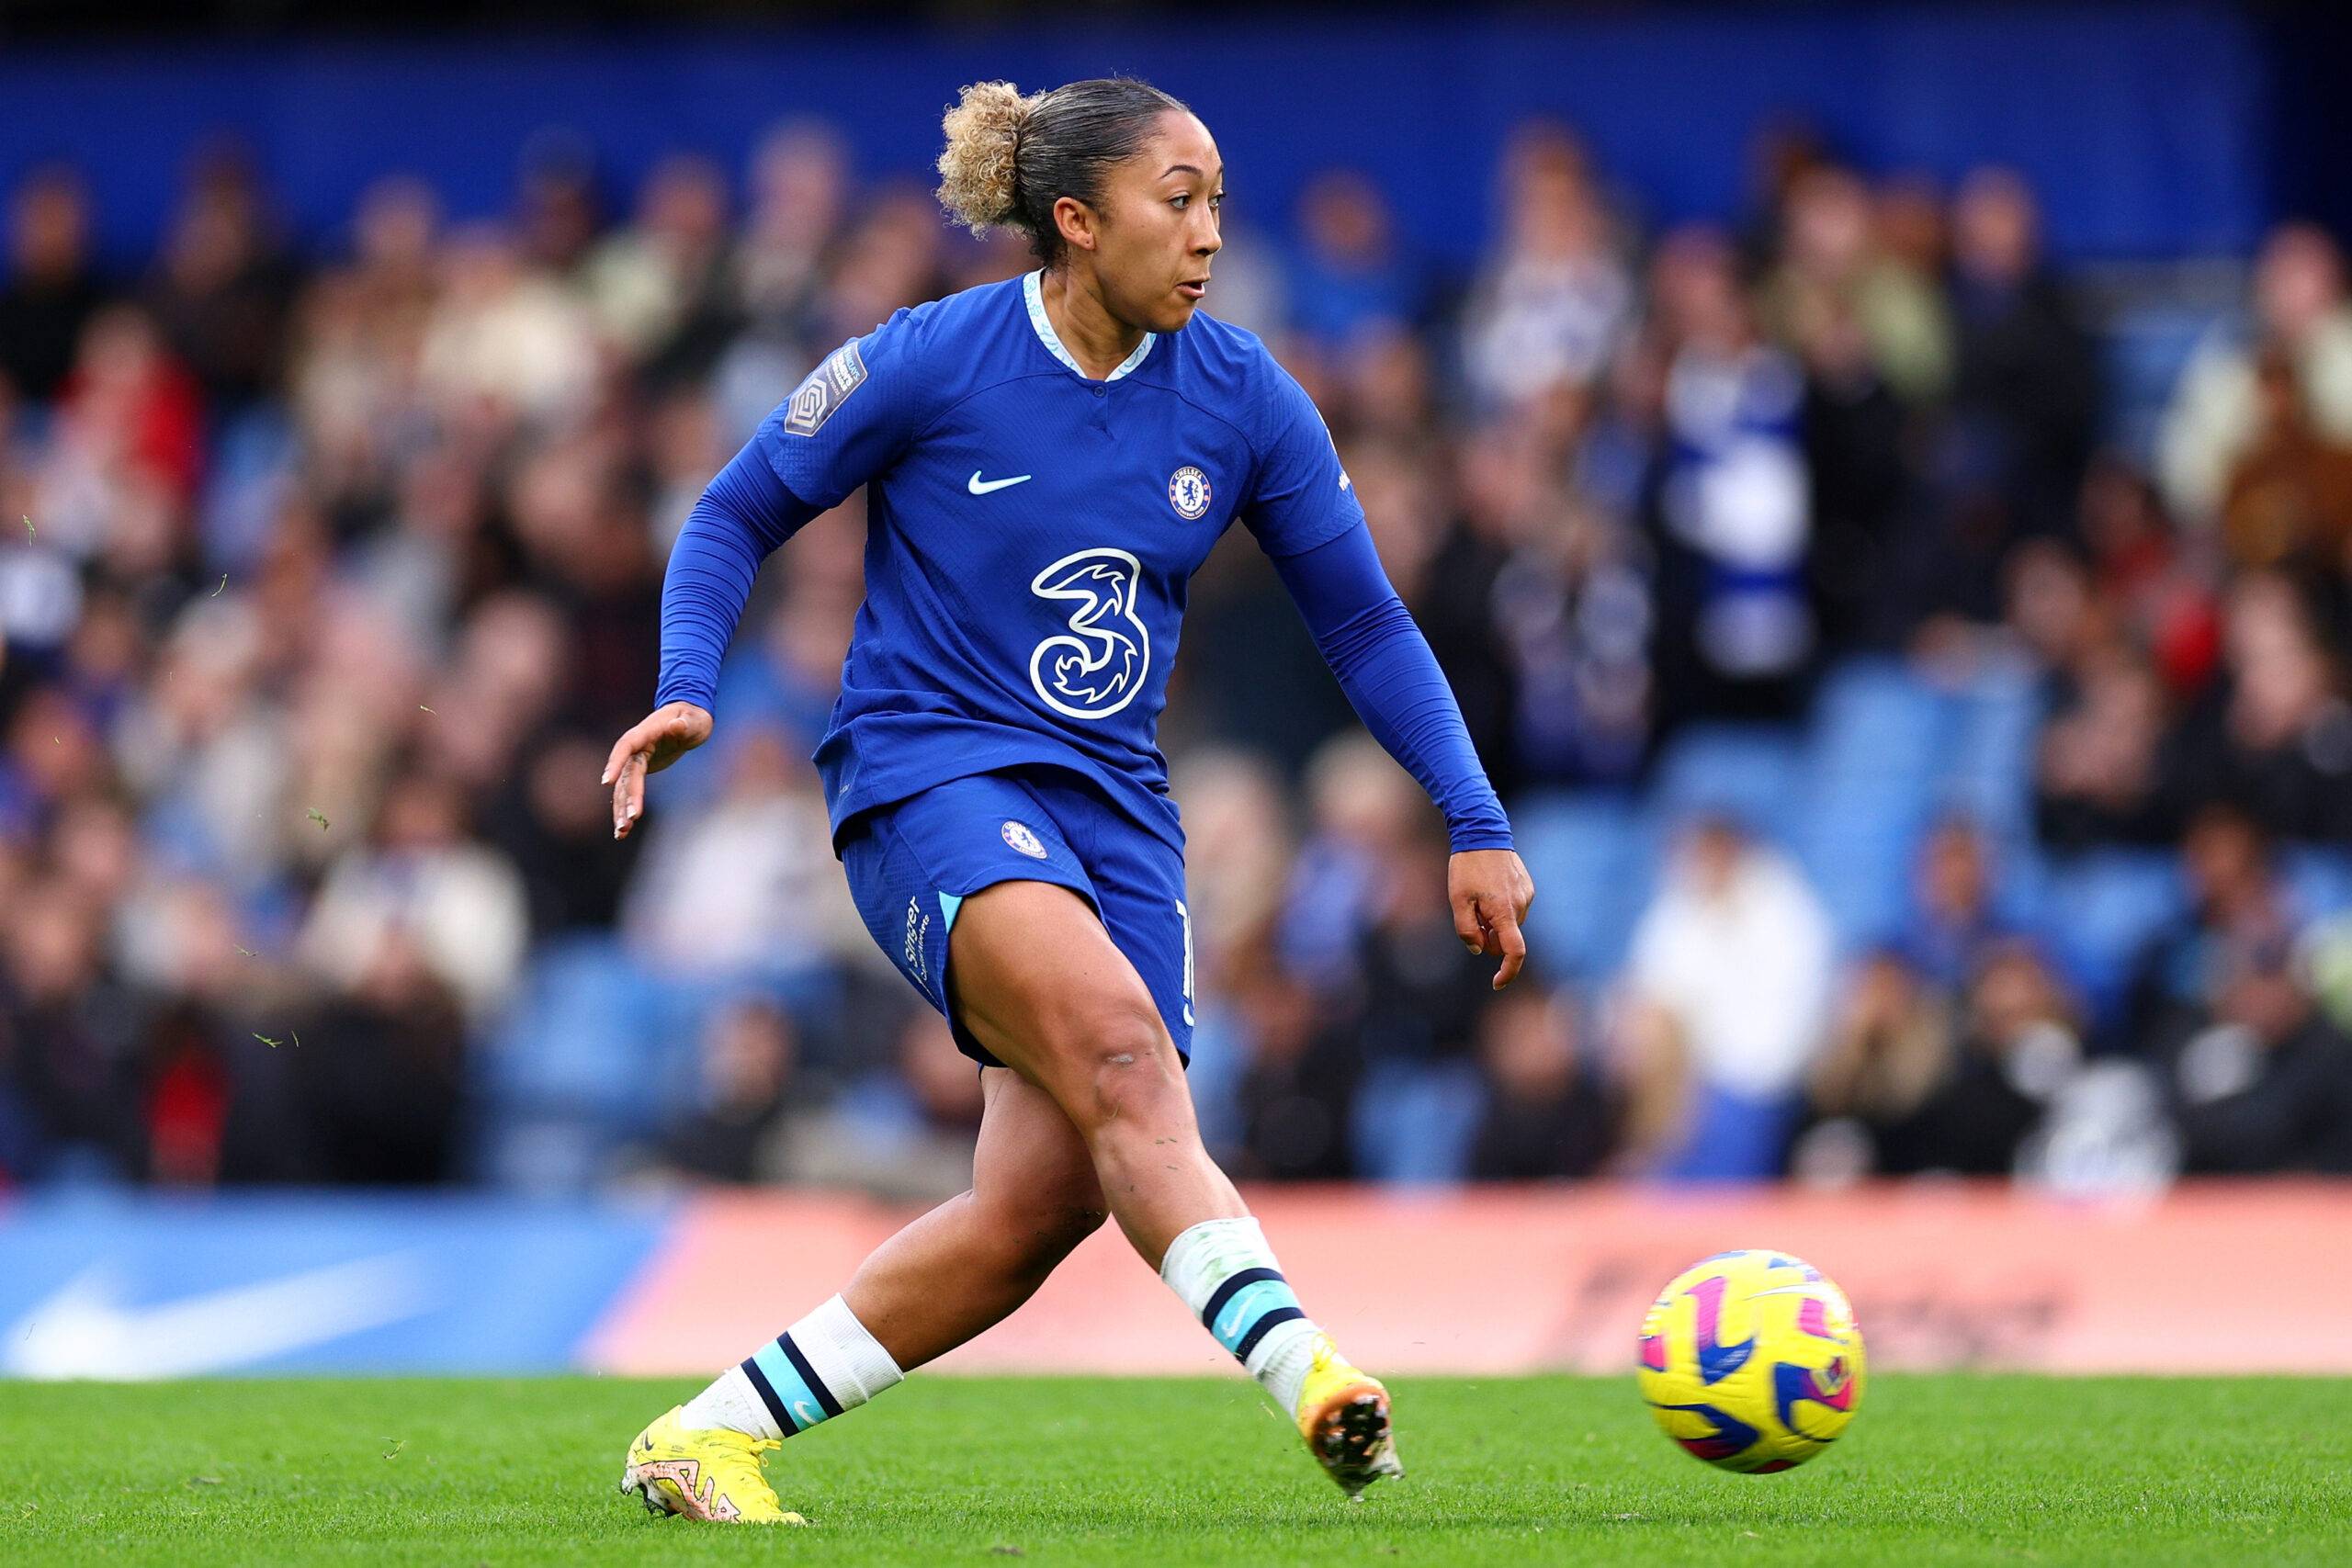 Lauren James of Chelsea in action during the FA Women's Super League match between Chelsea and Tottenham Hotspur at Stamford Bridge